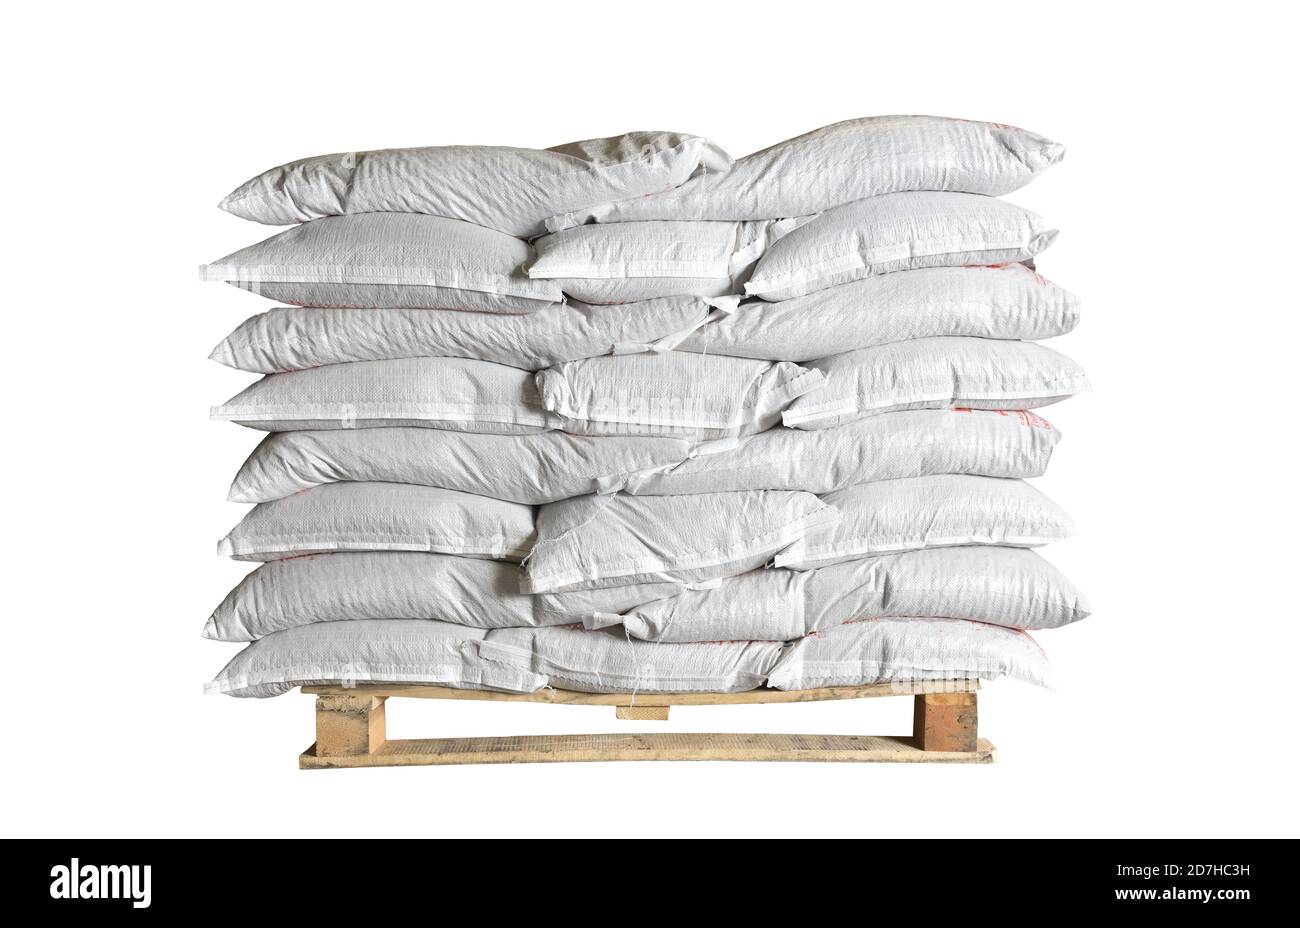 Full white bags stacked on a pallet on isolated white background Stock Photo